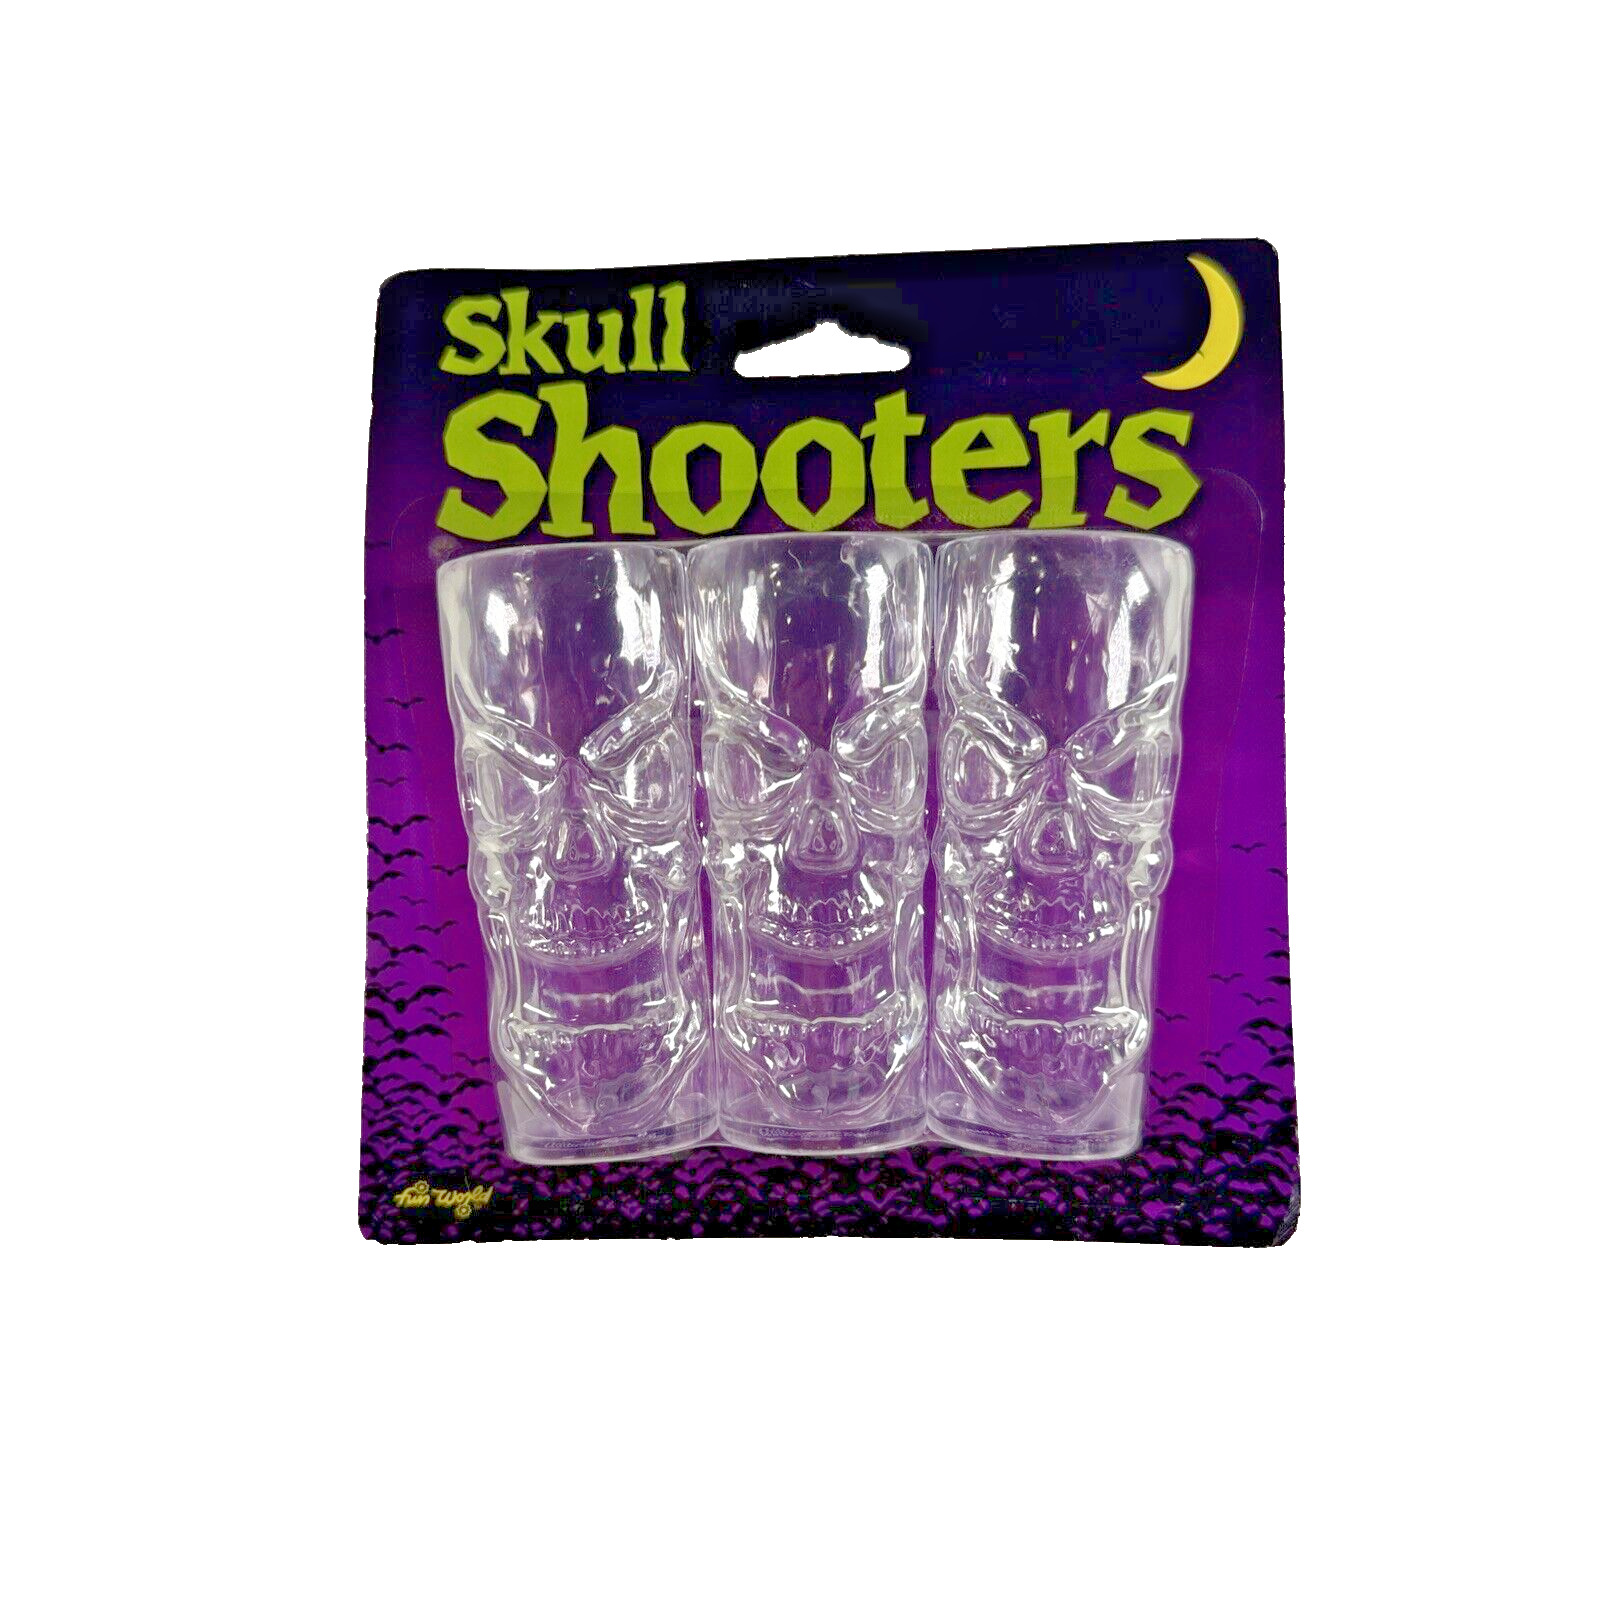 NEW SEALED 3X Clear Acrylic Gothic Skeleton Skull Face Shot Glasses Shooters